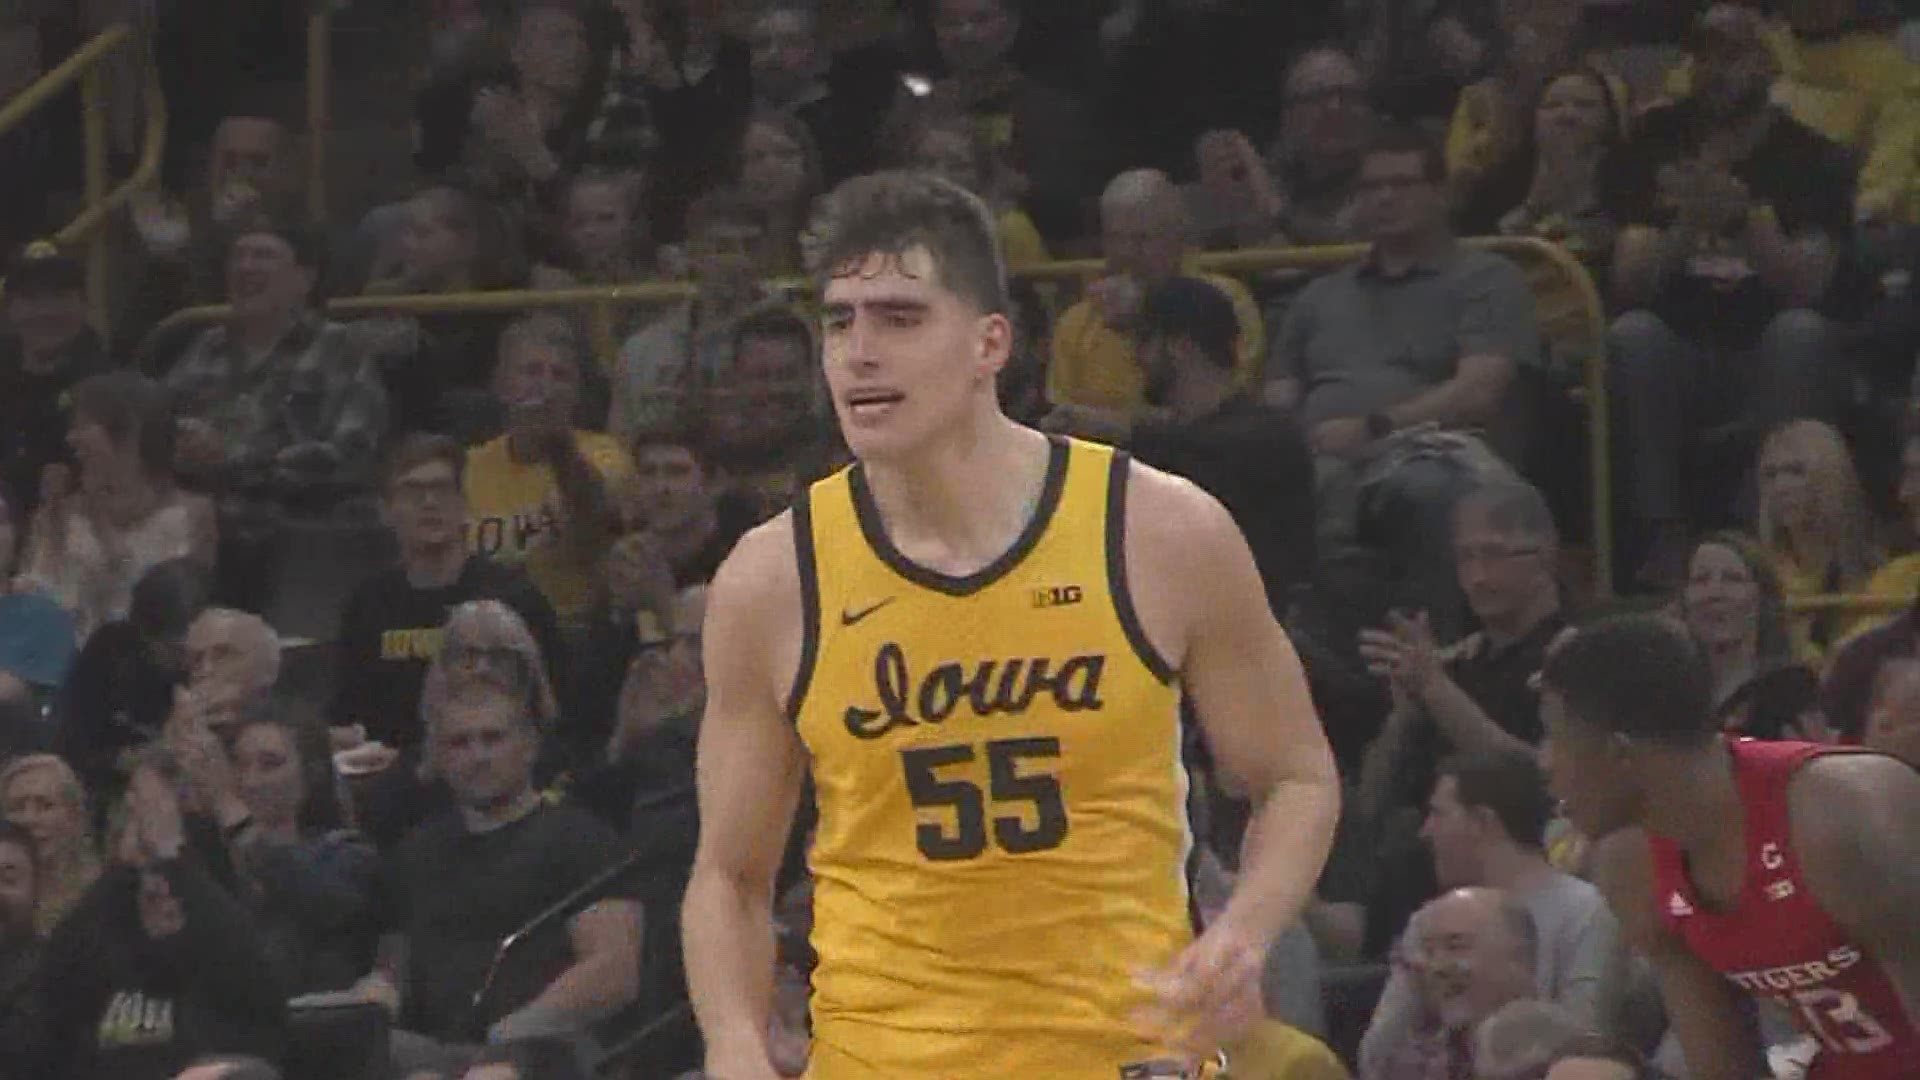 Luka Garza has entered the NBA Draft process but will remain eligible to return to Iowa for his senior season if he chooses